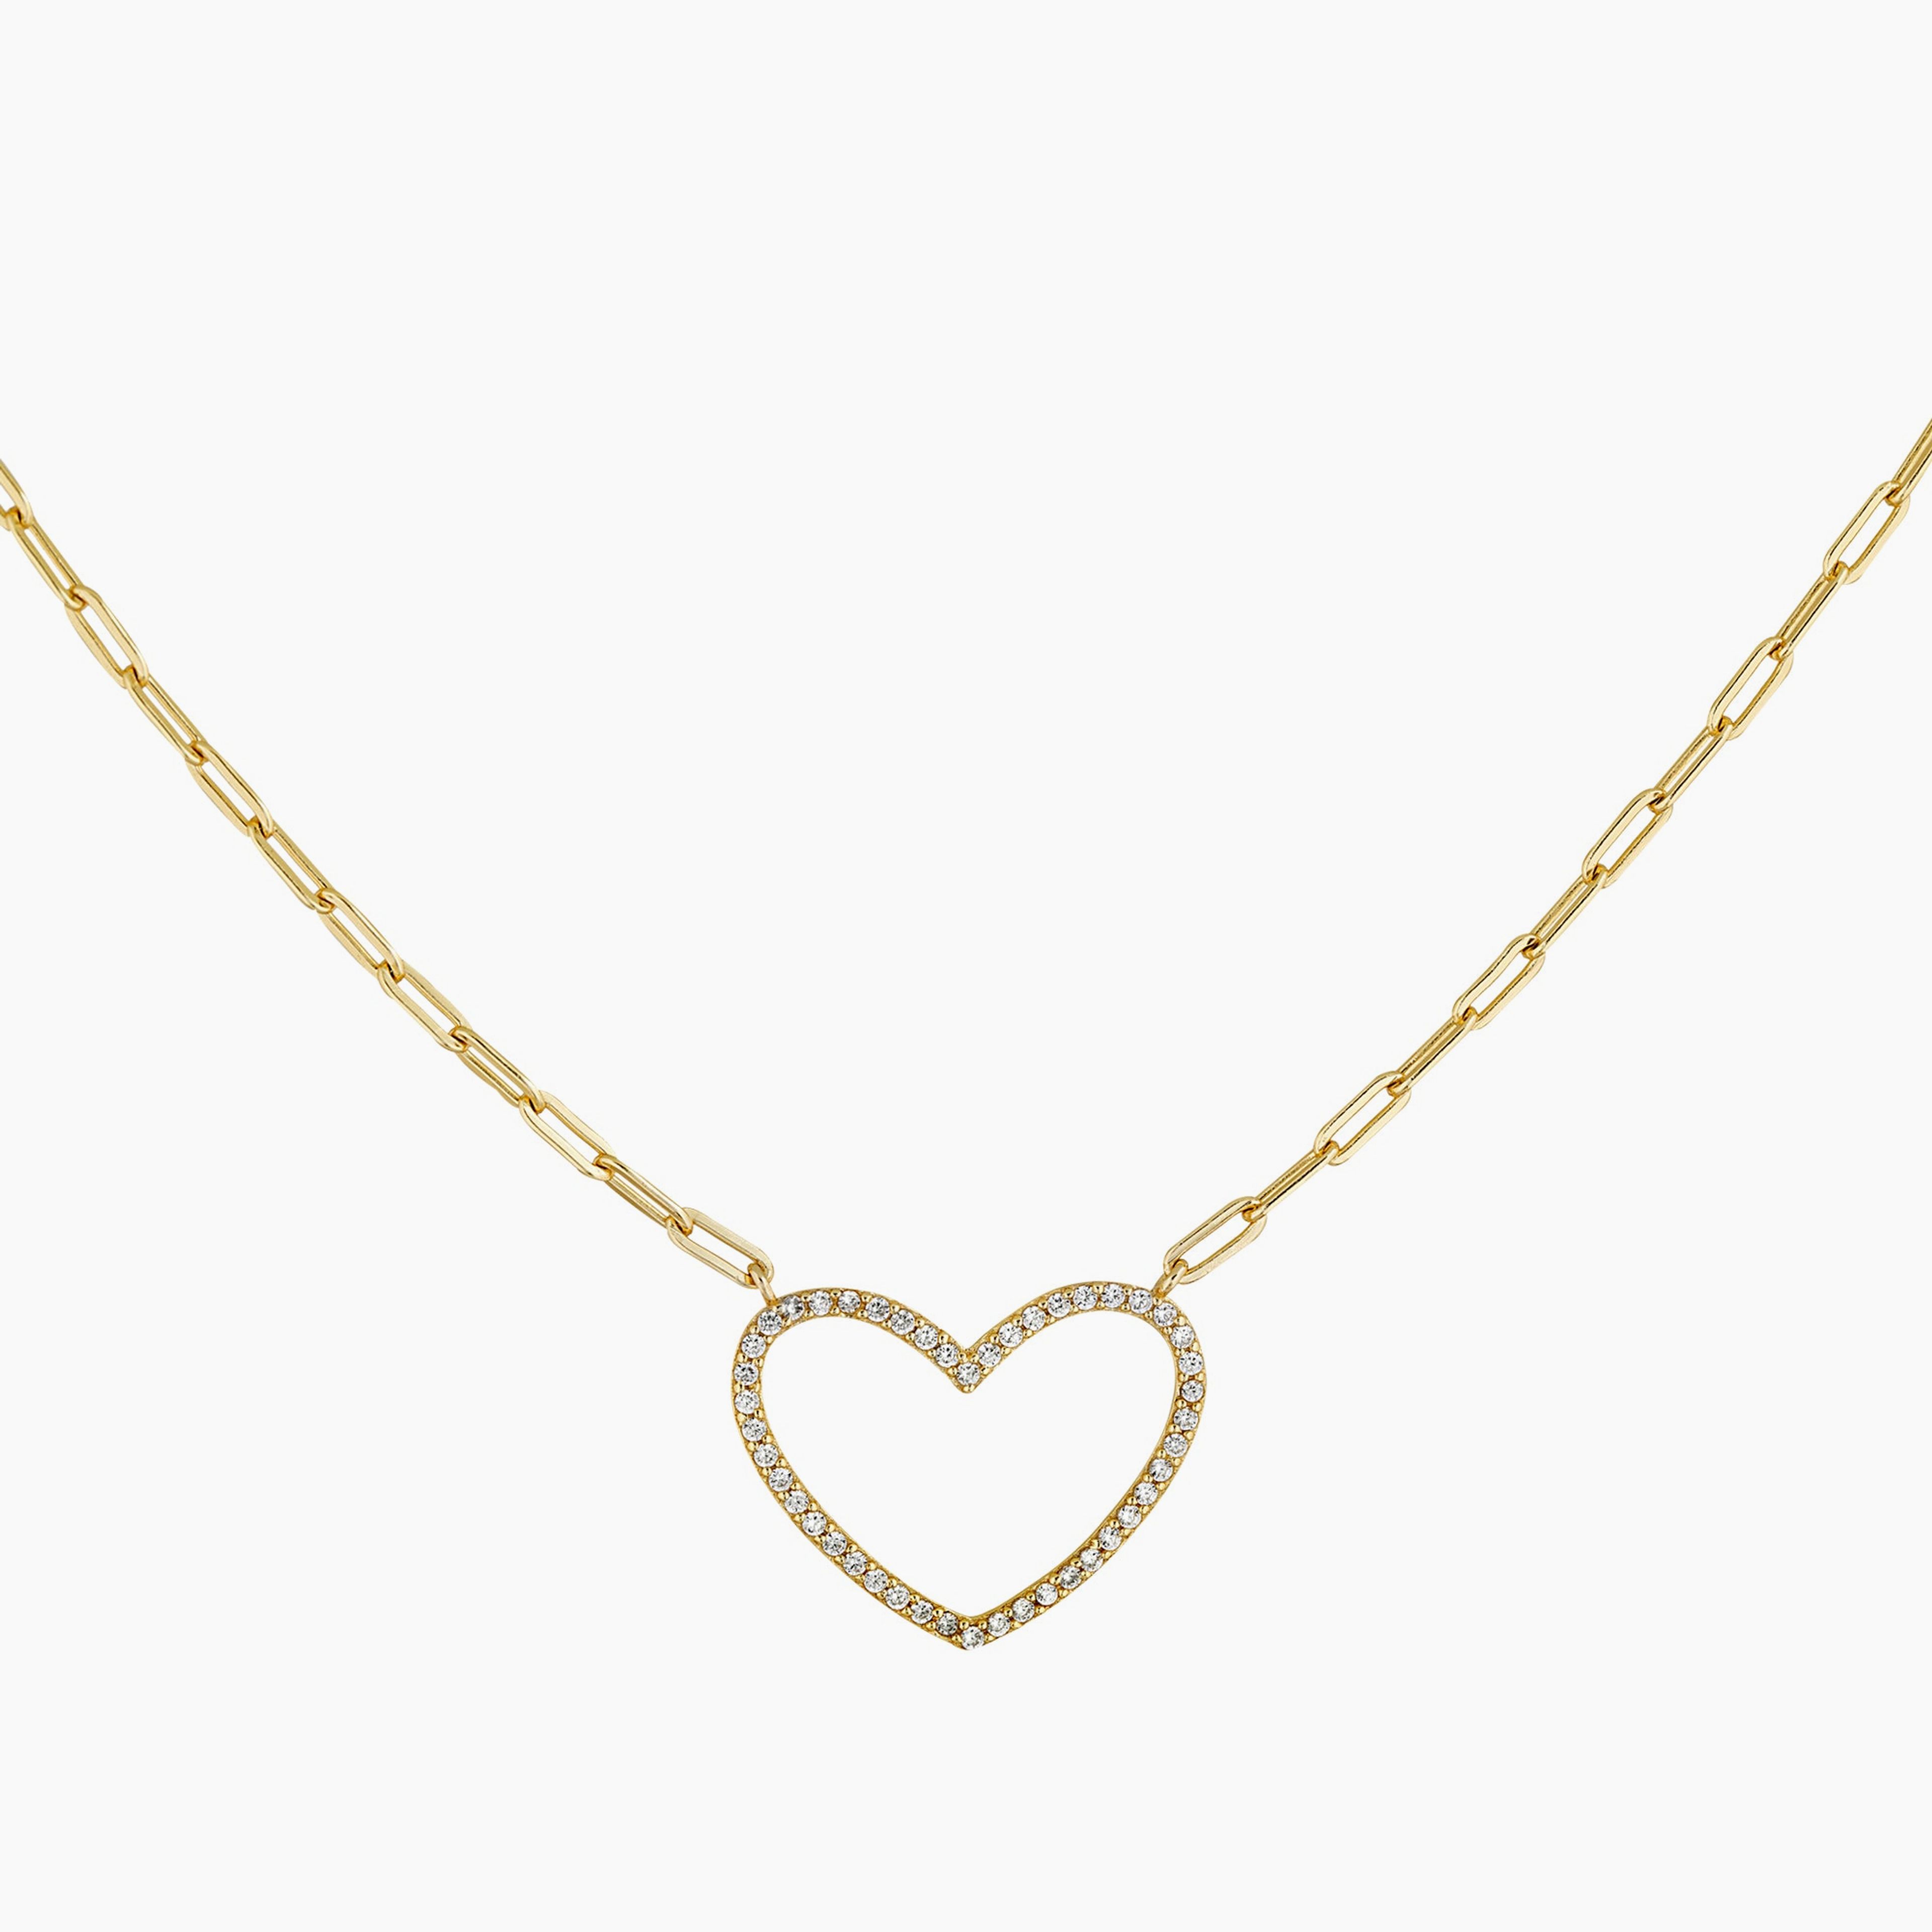 Crystal Hollow Heart Necklace